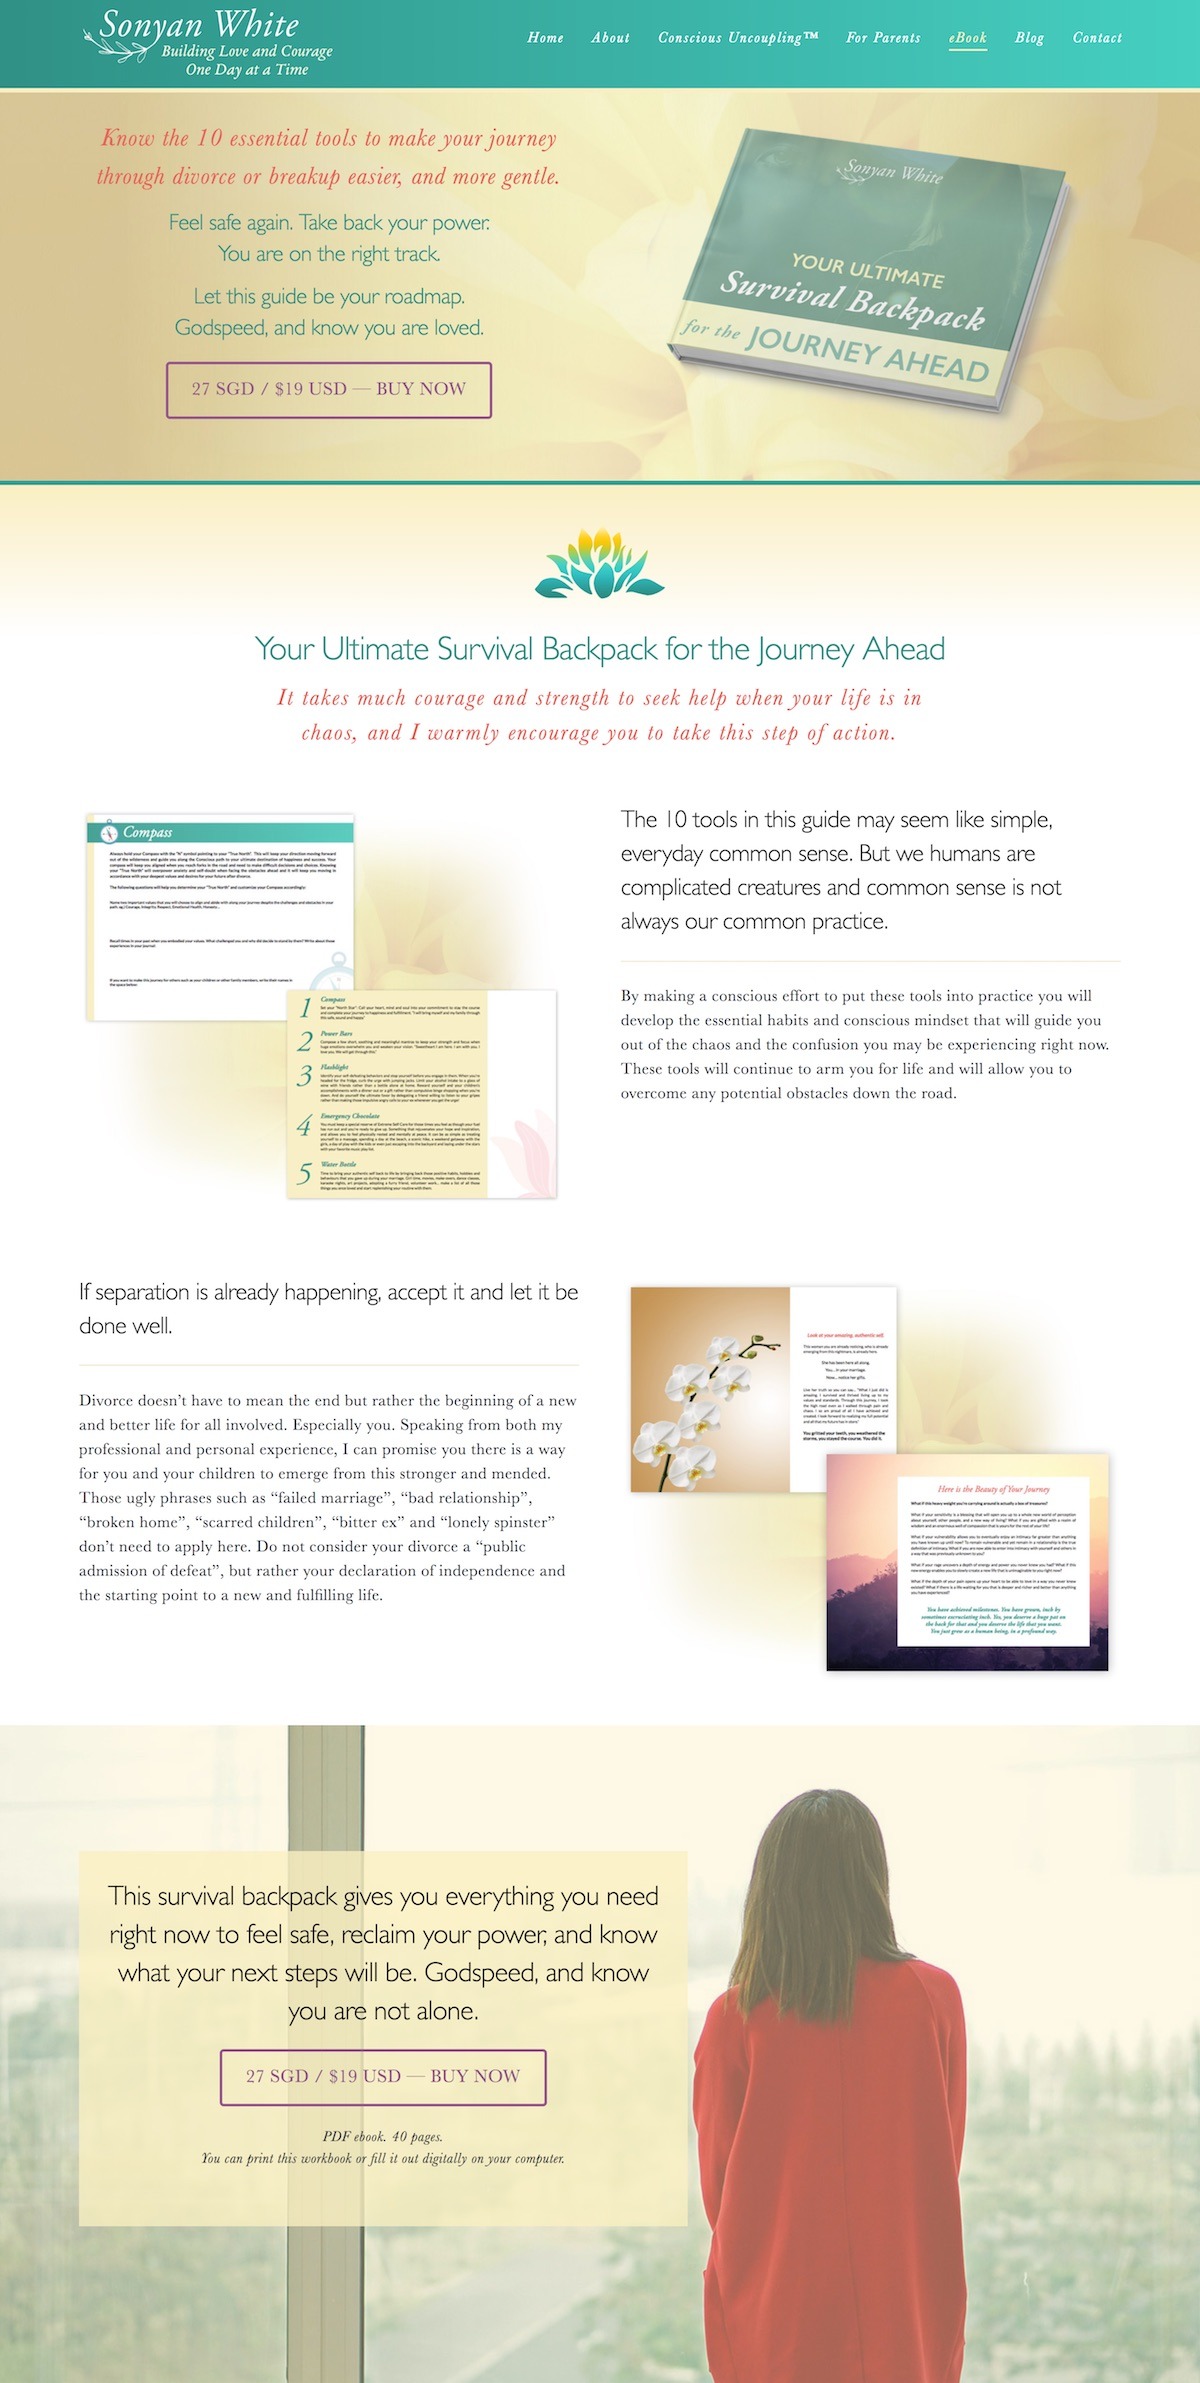 dreamy website design for conscious uncoupling coach Sonyan White